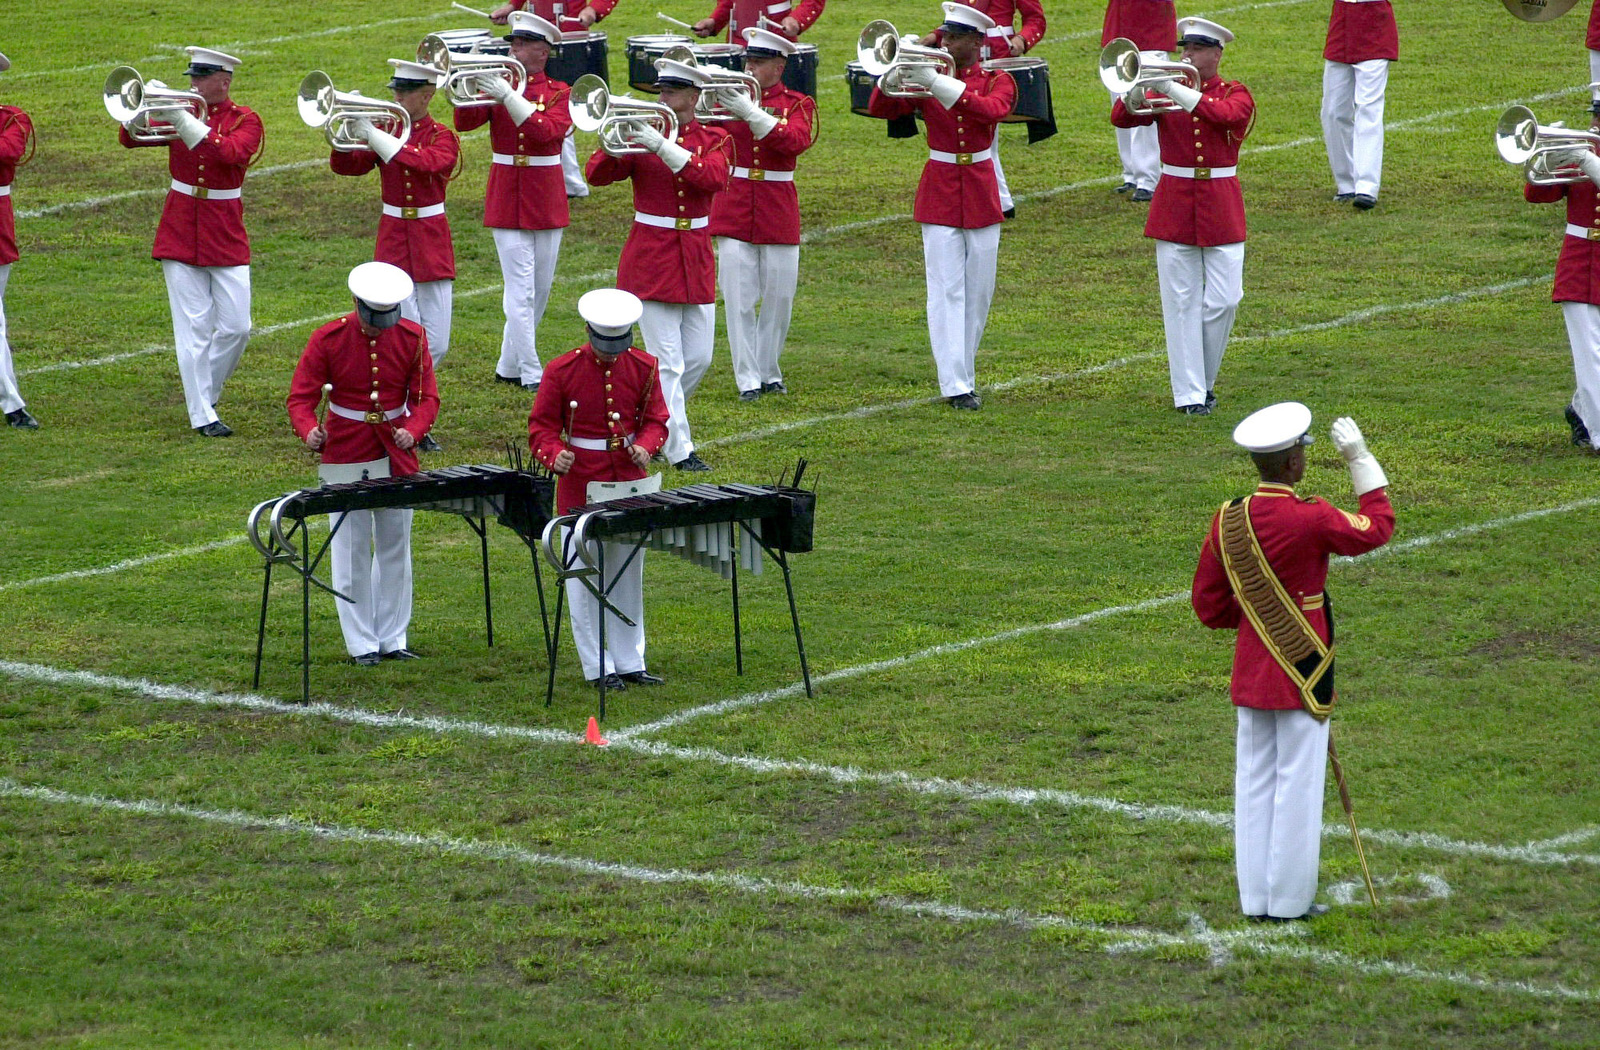 The US Marine Corps (USMC) Drum and Bugle Corps performed various songs